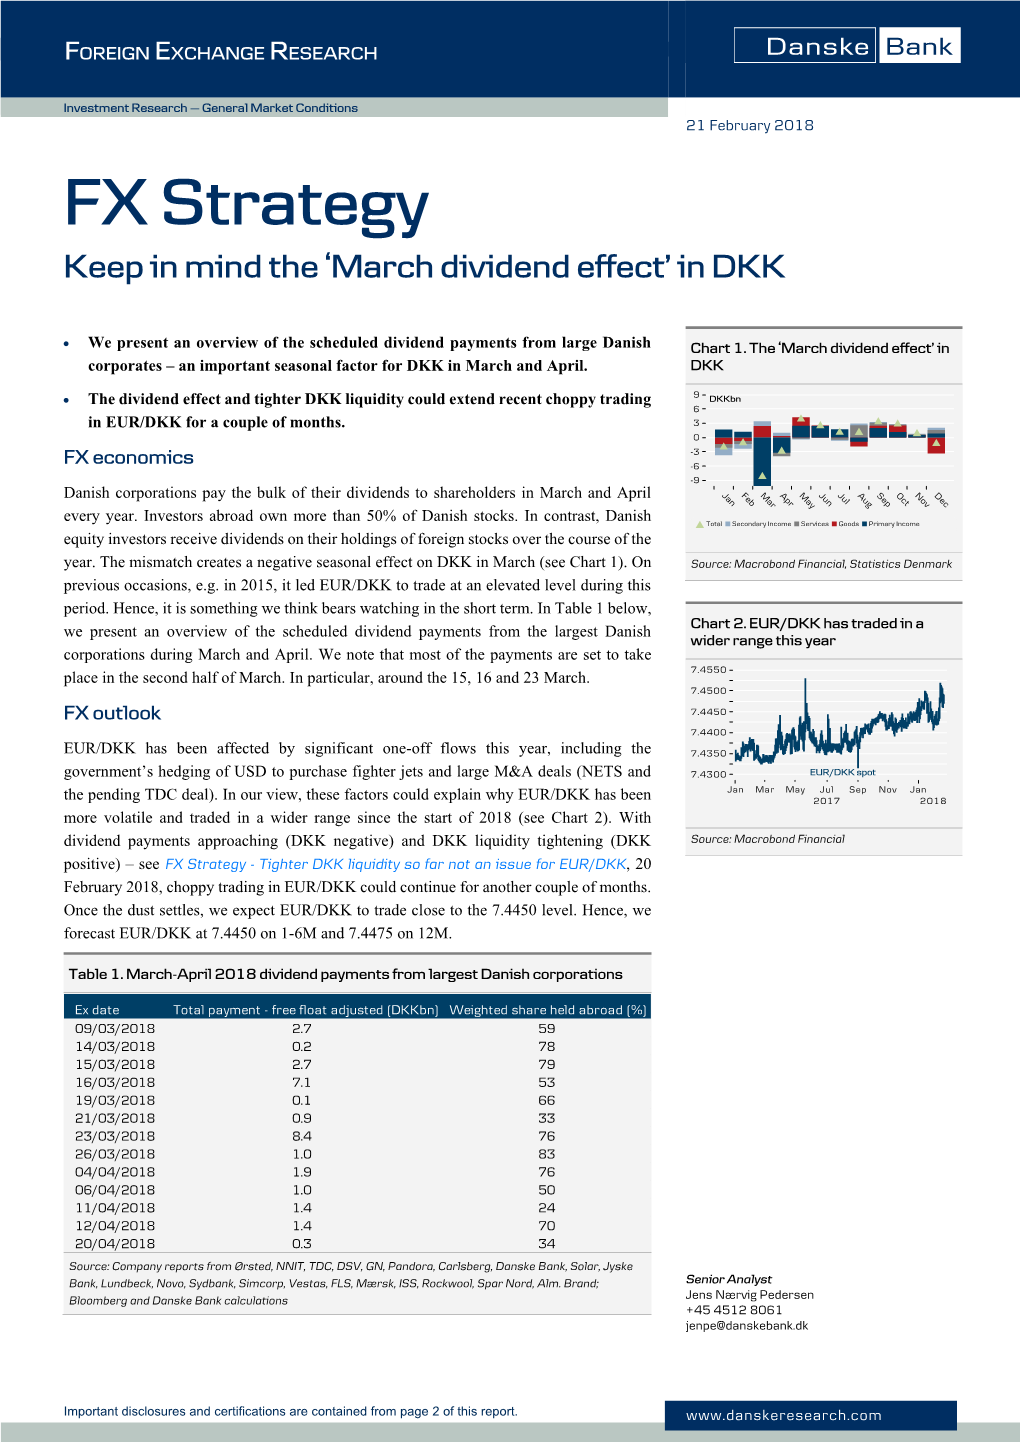 FX Strategy Keep in Mind the ‘March Dividend Effect’ in DKK